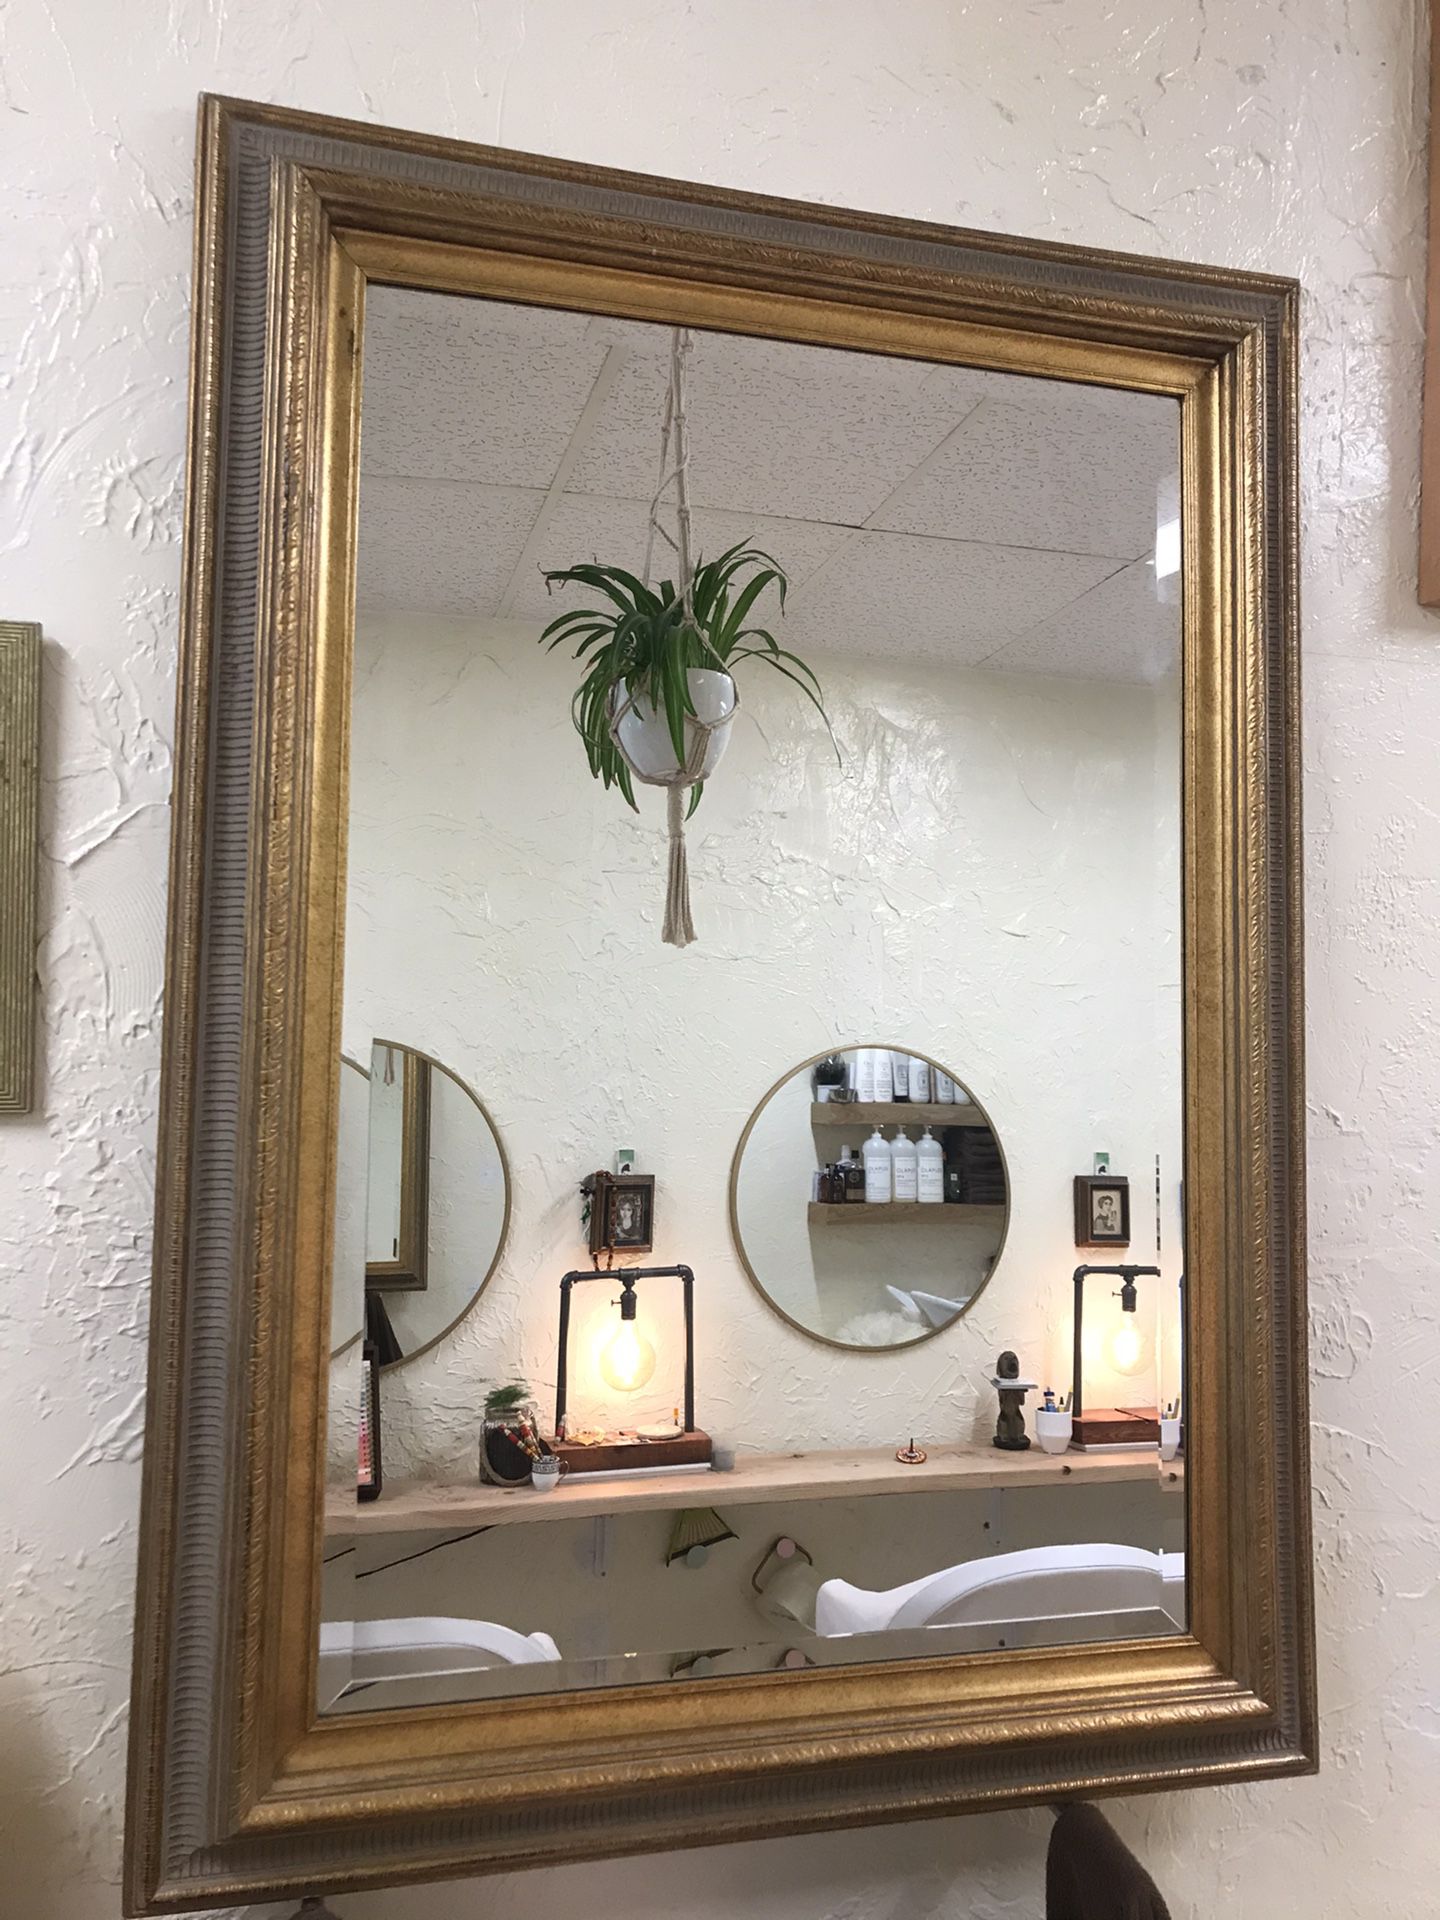 Gold Gilded Wall Mirror